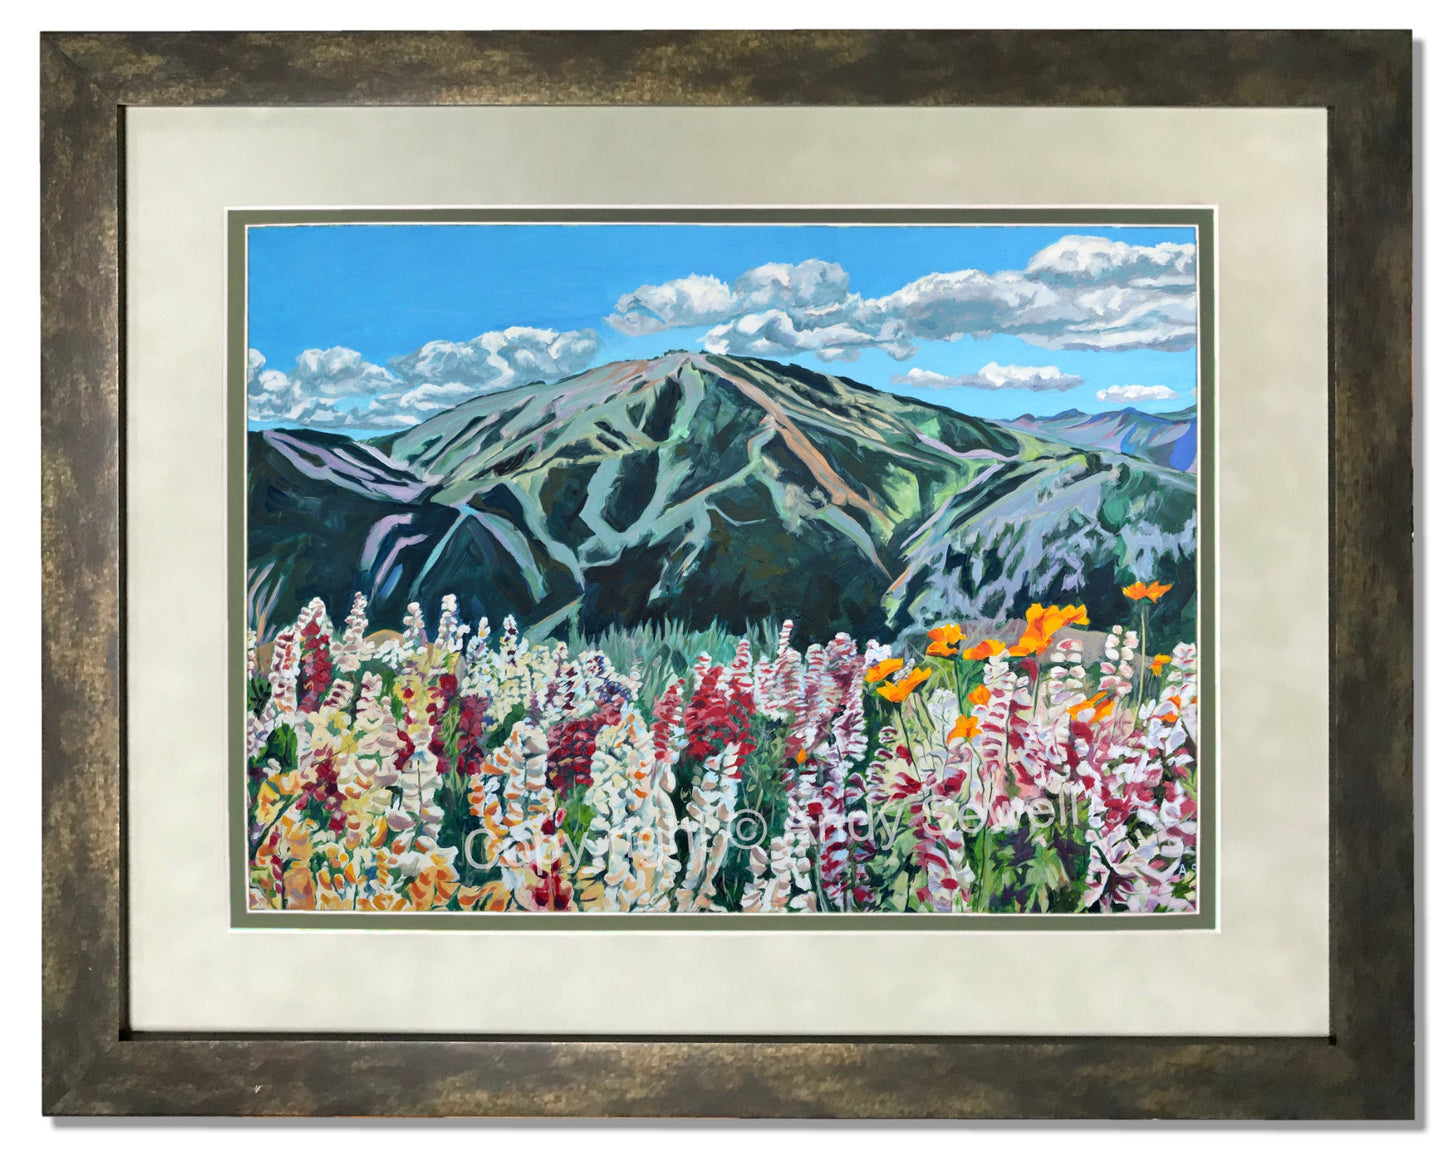 "Sun Valley Summer Color" - 48"x30" ltd. ed. of 400, Giclée of Sun Valley's Bald Mtn. in Summer w/wildflowers